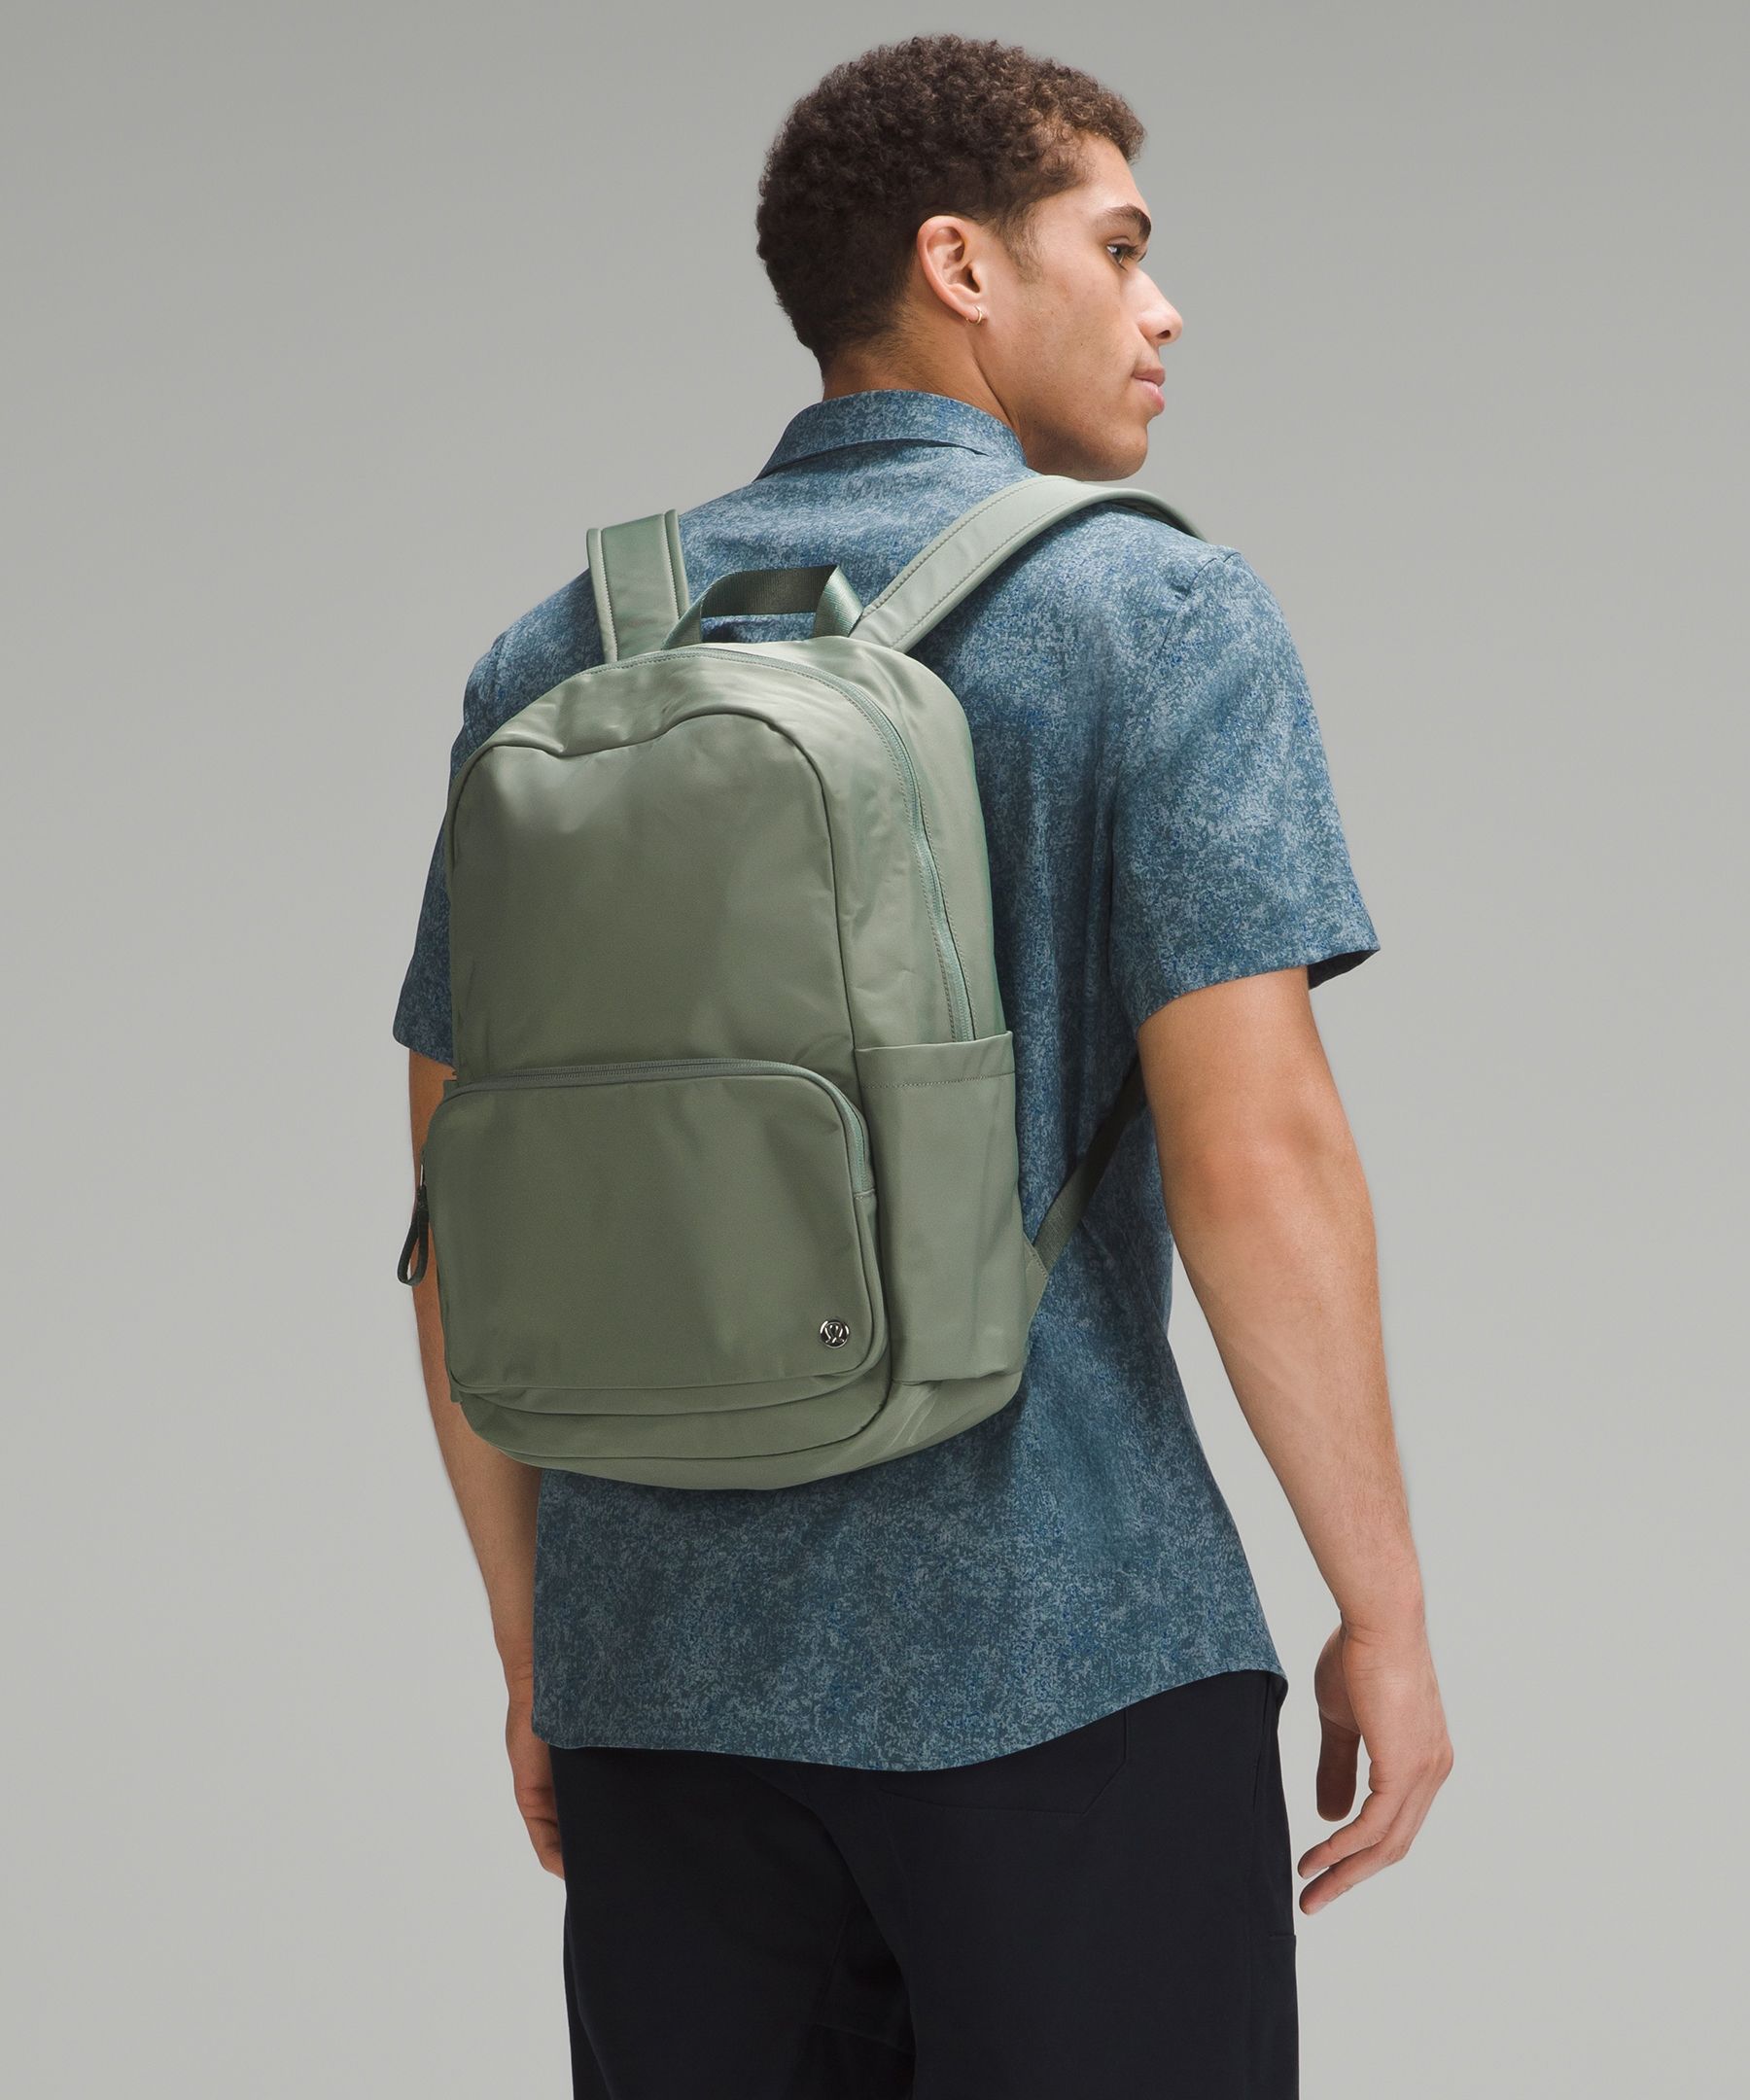 Everywhere Backpack 22L | Unisex Bags,Purses,Wallets